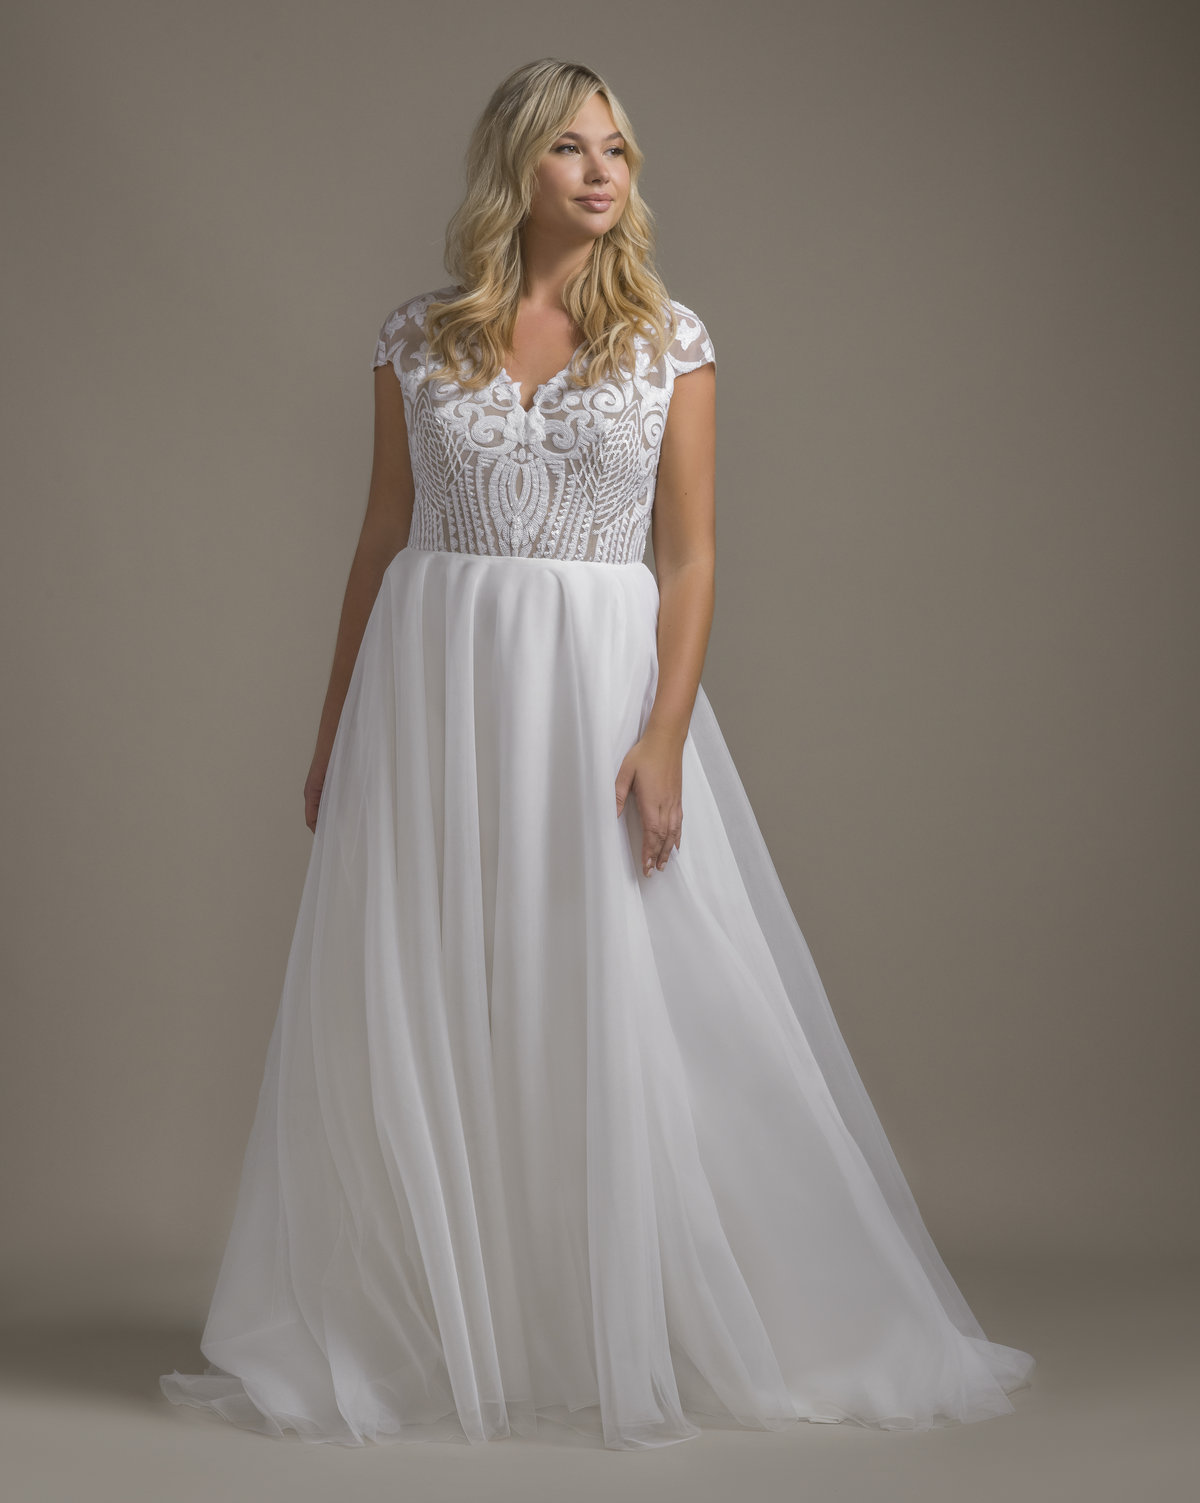 Bridal Gowns and Wedding Dresses by JLM Couture - Style 1920 Dakota